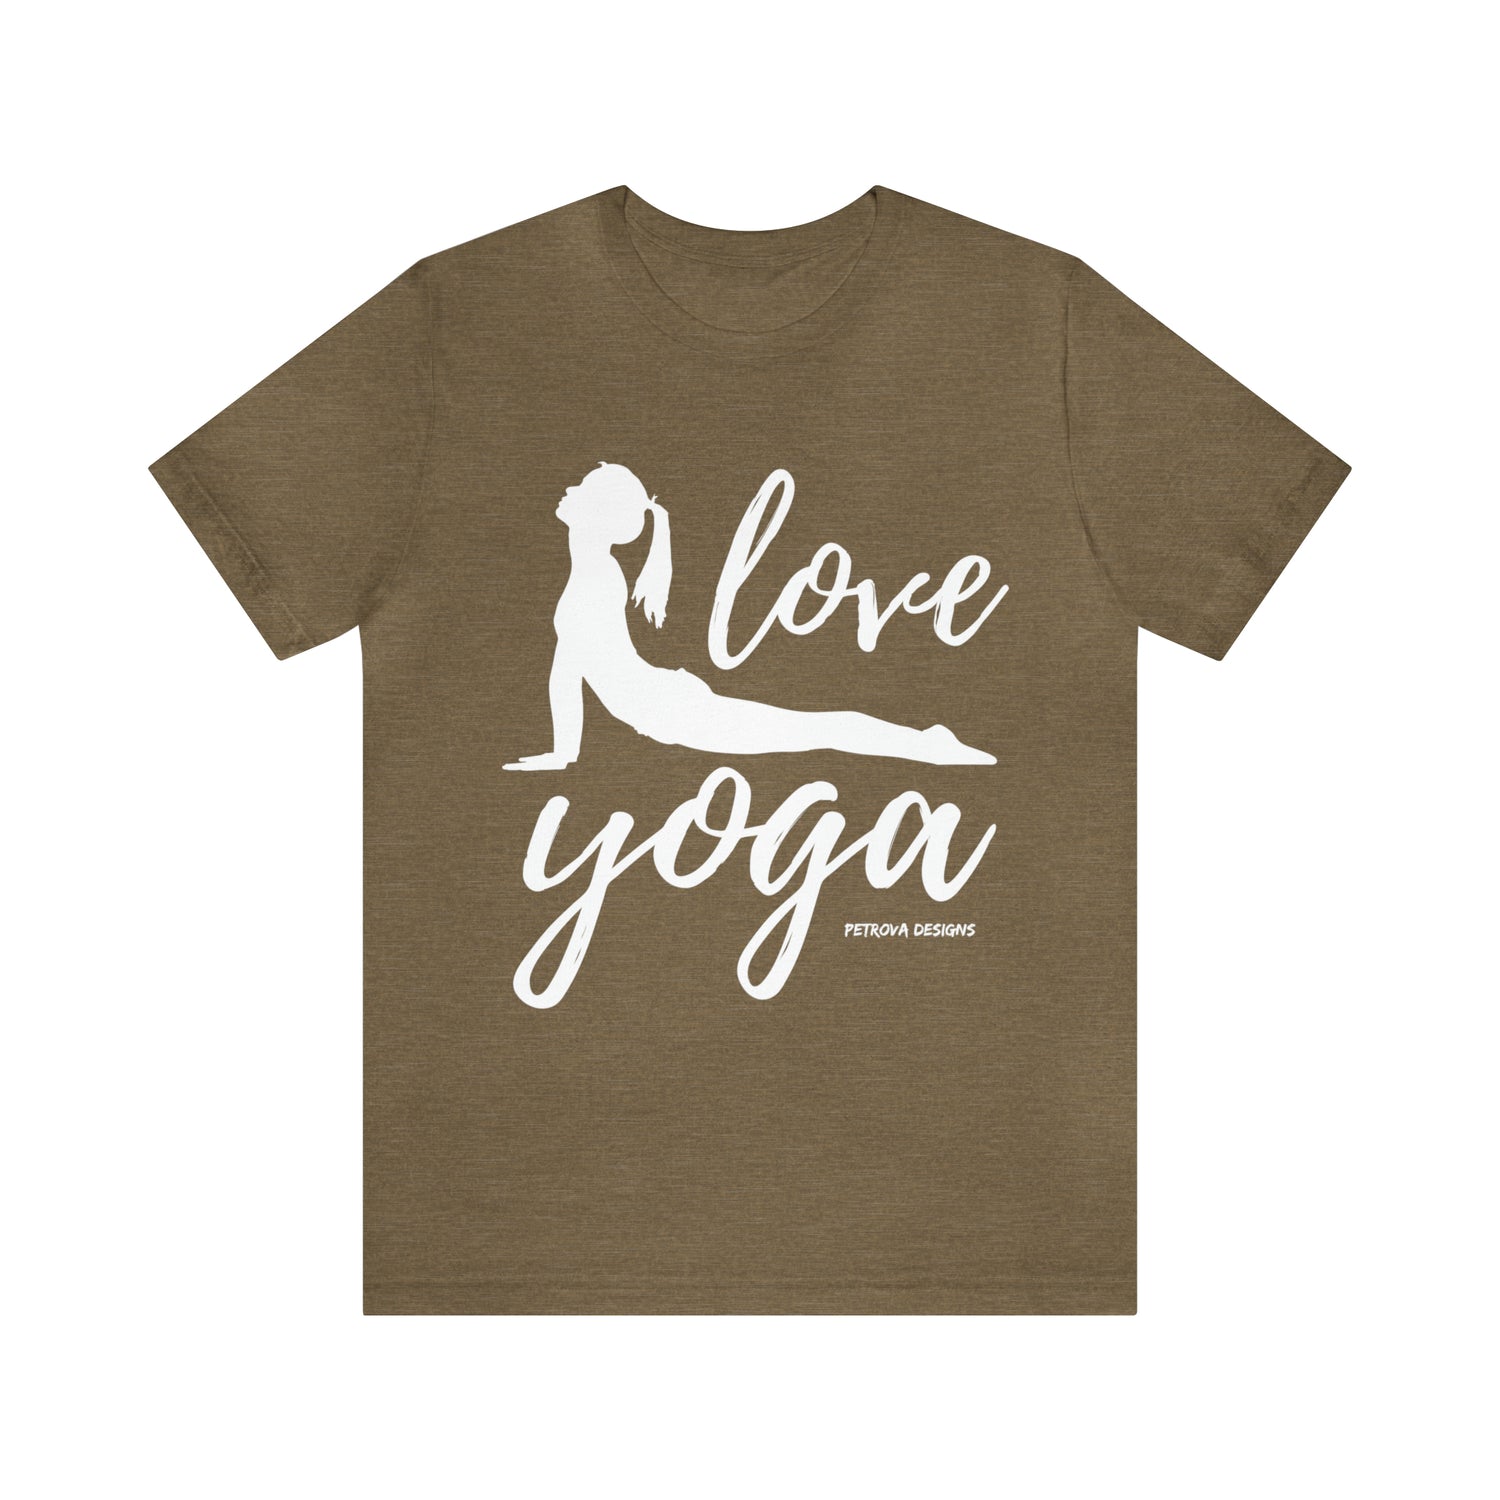 Heather Olive T-Shirt Tshirt Design Gift for Friend and Family Short Sleeved Shirt Yoga Petrova Designs